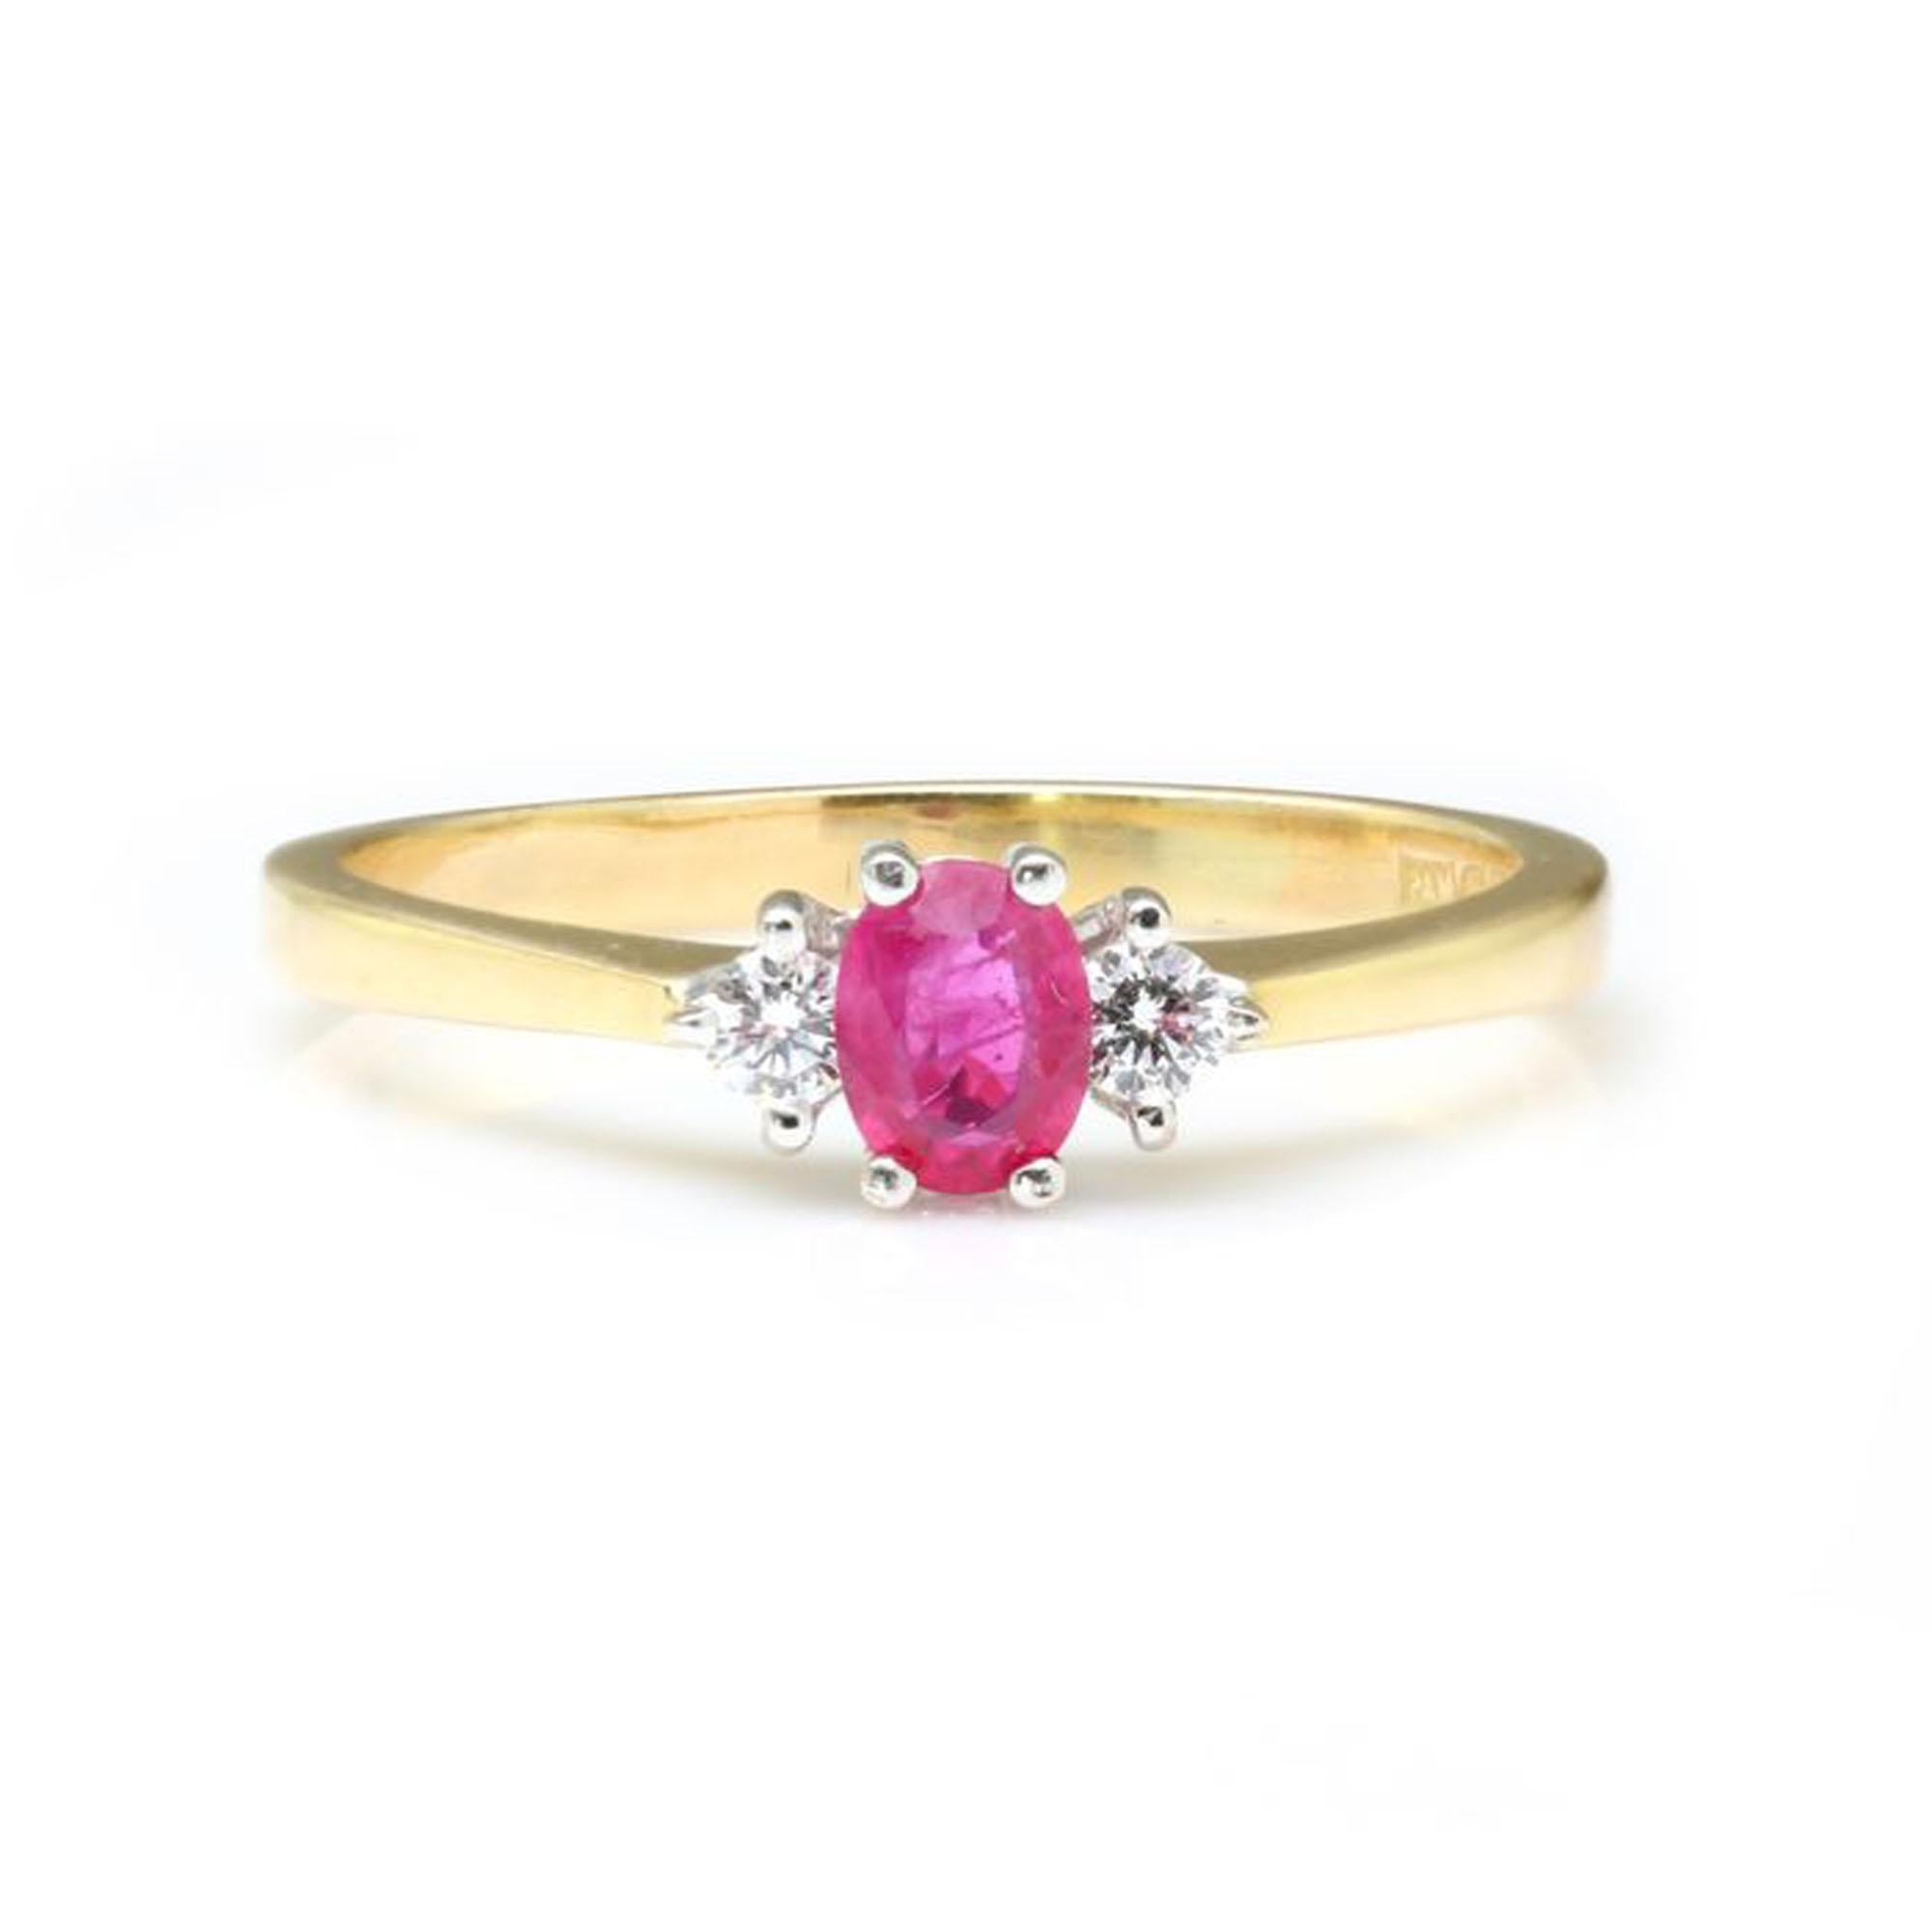 Vintage 18kt yellow gold ladies ring with natural ruby and diamonds
Made in England, Circa 1990's
Hallmarked 750

Dimensions -
Finger Size (UK) = R (US) = 8 3/4 (EU) = 58 1/2
Ring Size; 2.6 x 2.2 x 0.6 cm
Weight: 3.23 grams

Ruby - 
Cut: Oval
Approx